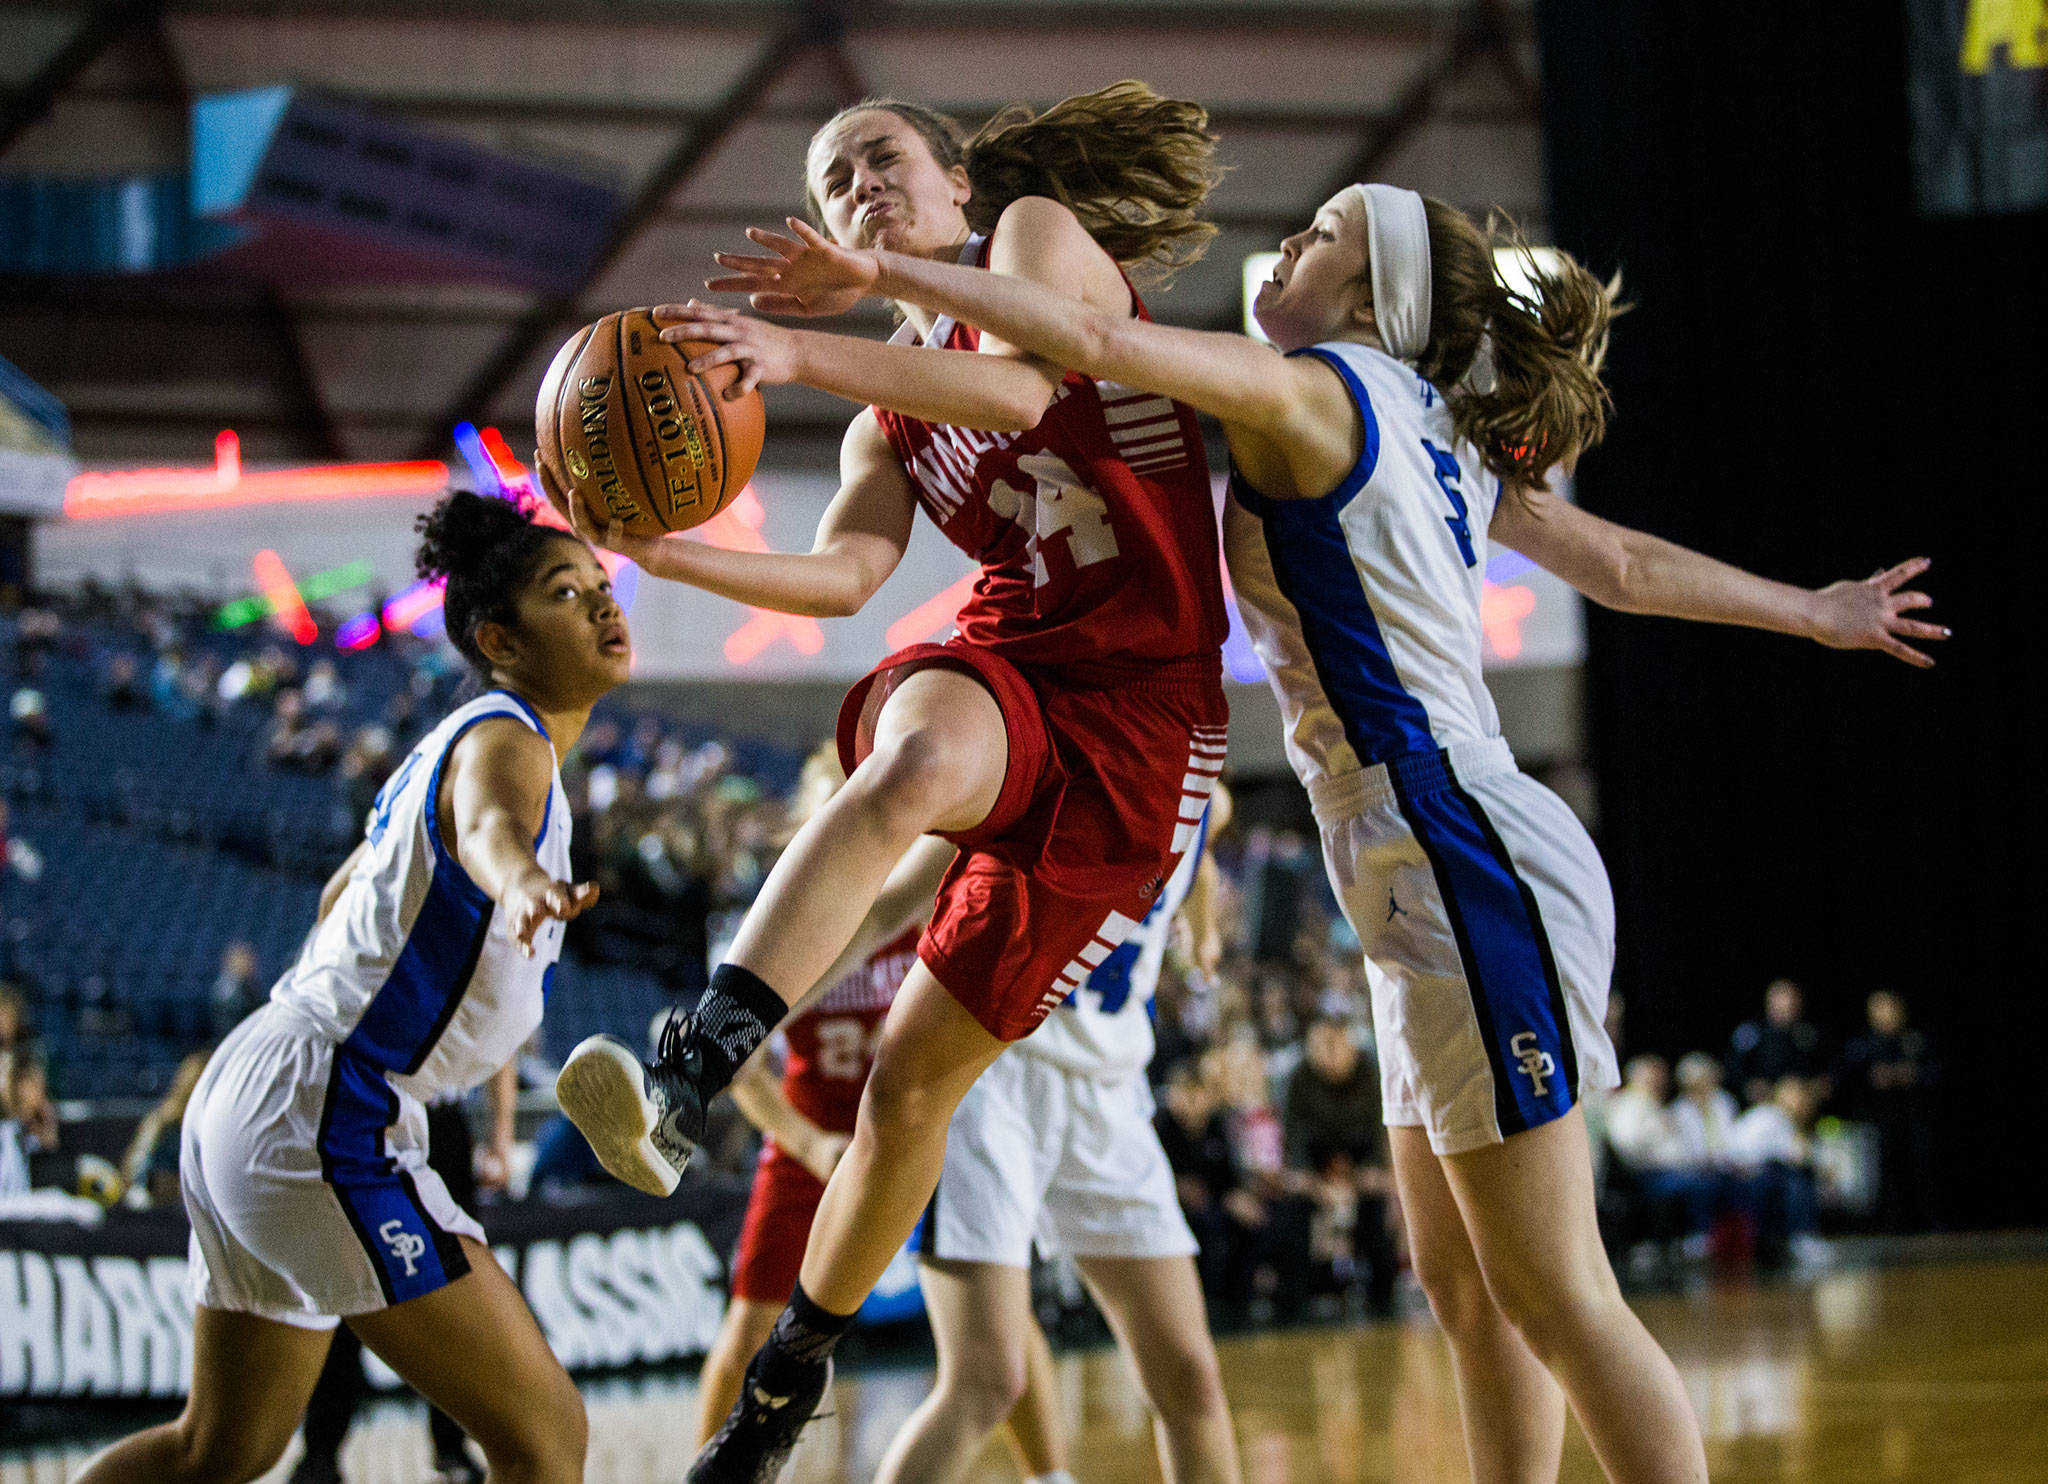 Snohomish senior point guard Maya DuChesne delivered clutch postseason performances and led the Panthers to a fourth-place state trophy. (Olivia Vanni / The Herald)